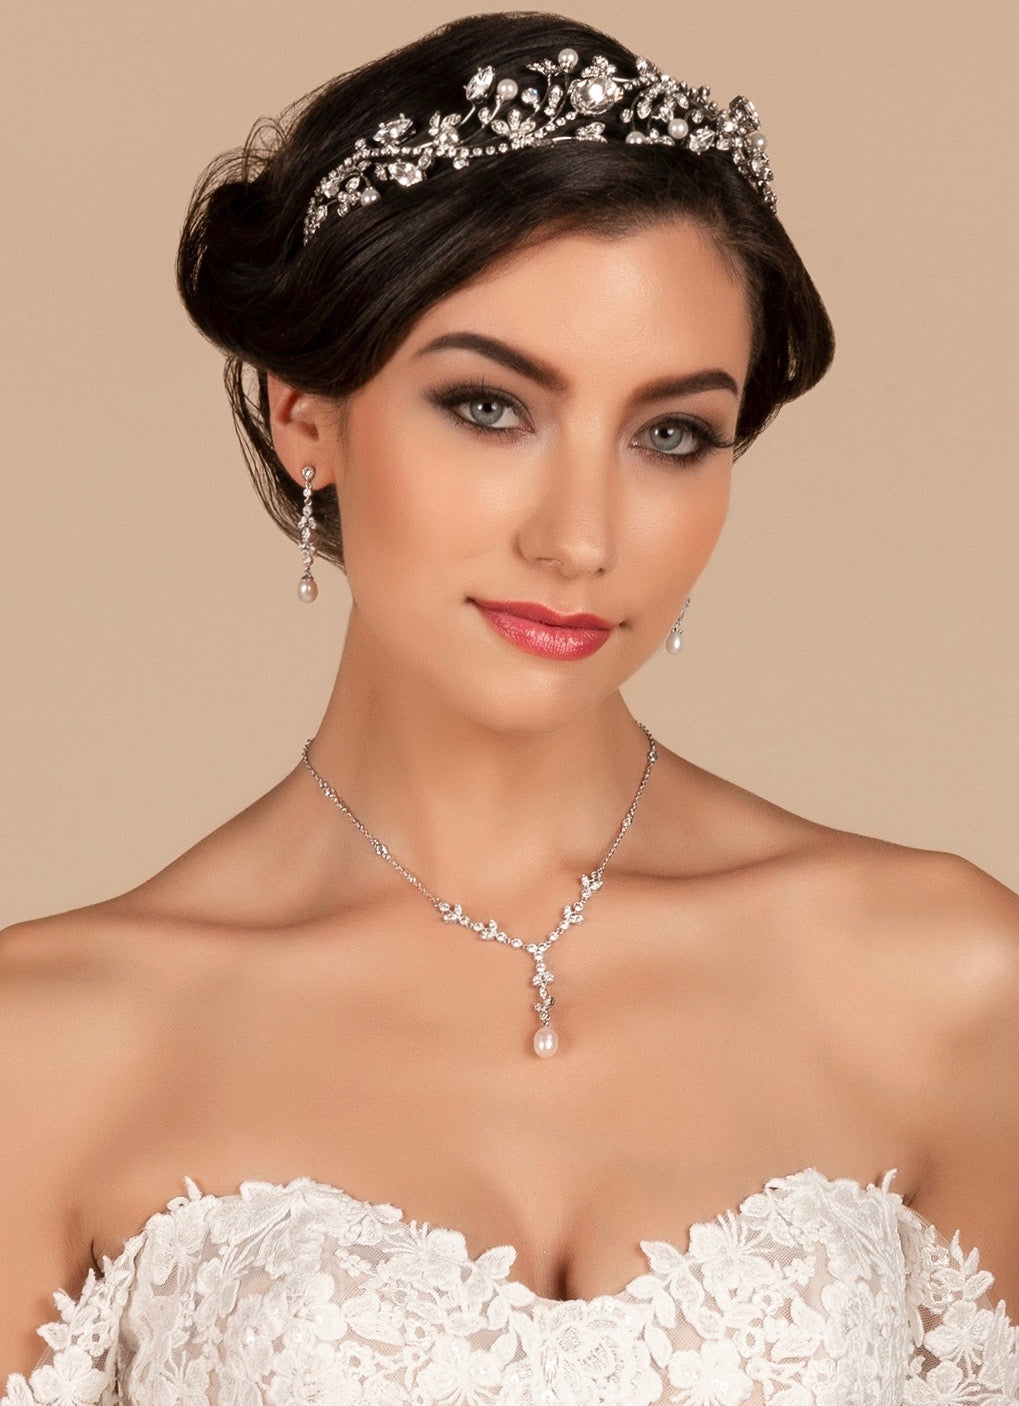 Bridal Pearls - Jewelry, Accessories and Decor